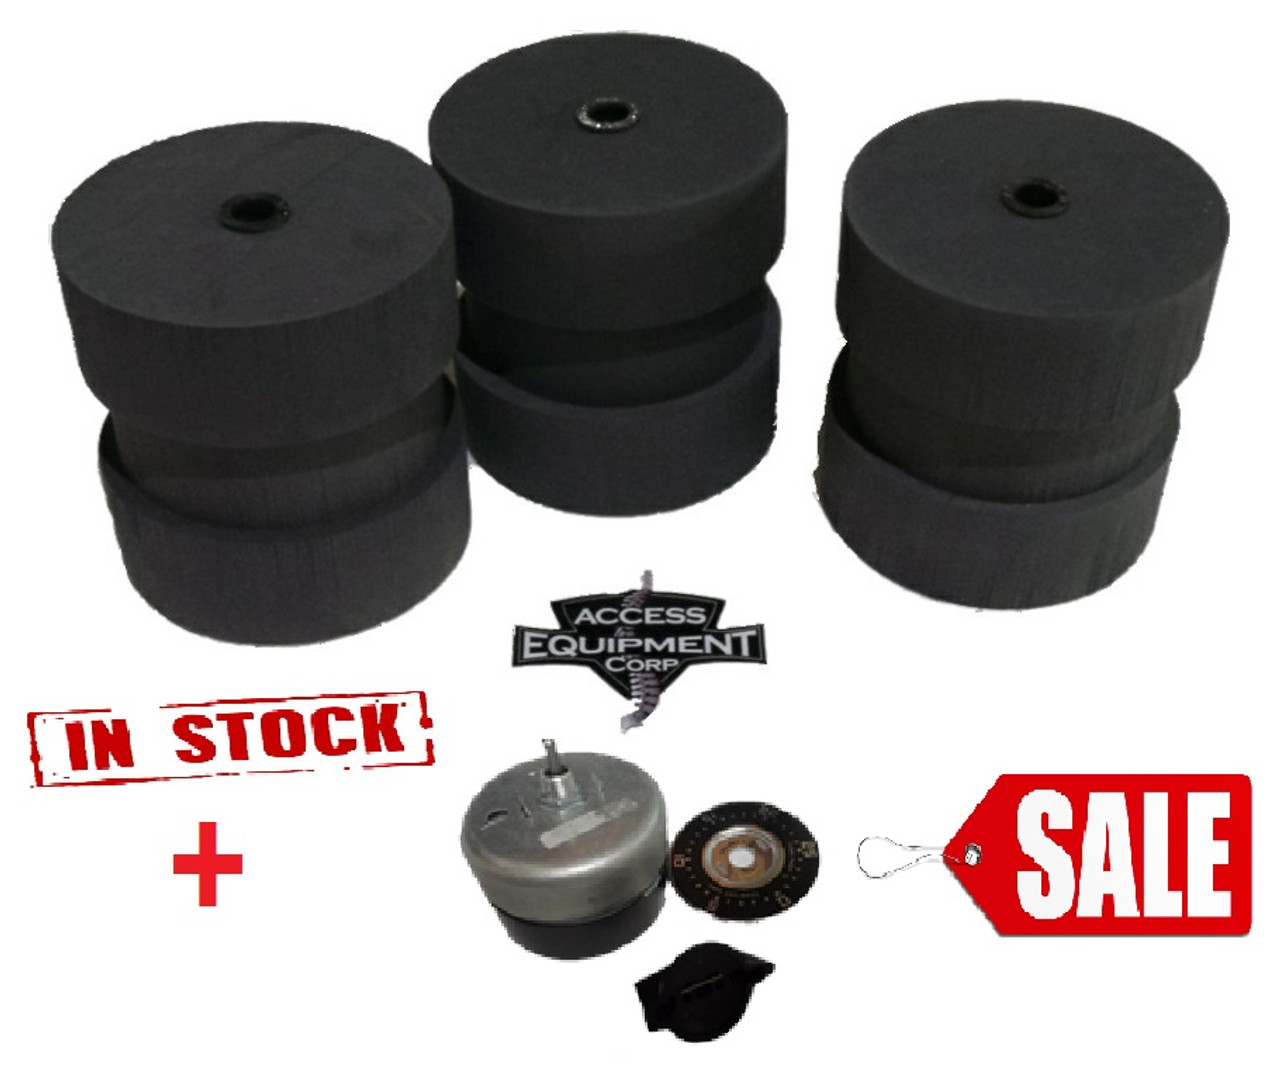 Looking for Replacement Rollers + Timer Kit, Spinalator Rollers, Spinalign Rollers, ATT300 Rollers, Quantum 400 Rollers, ASH7000 Rollers, Spinalator Timer, Spinalign Timer, ATT300 Timer, Quantum 400 Timer, ASH7000 Timer?